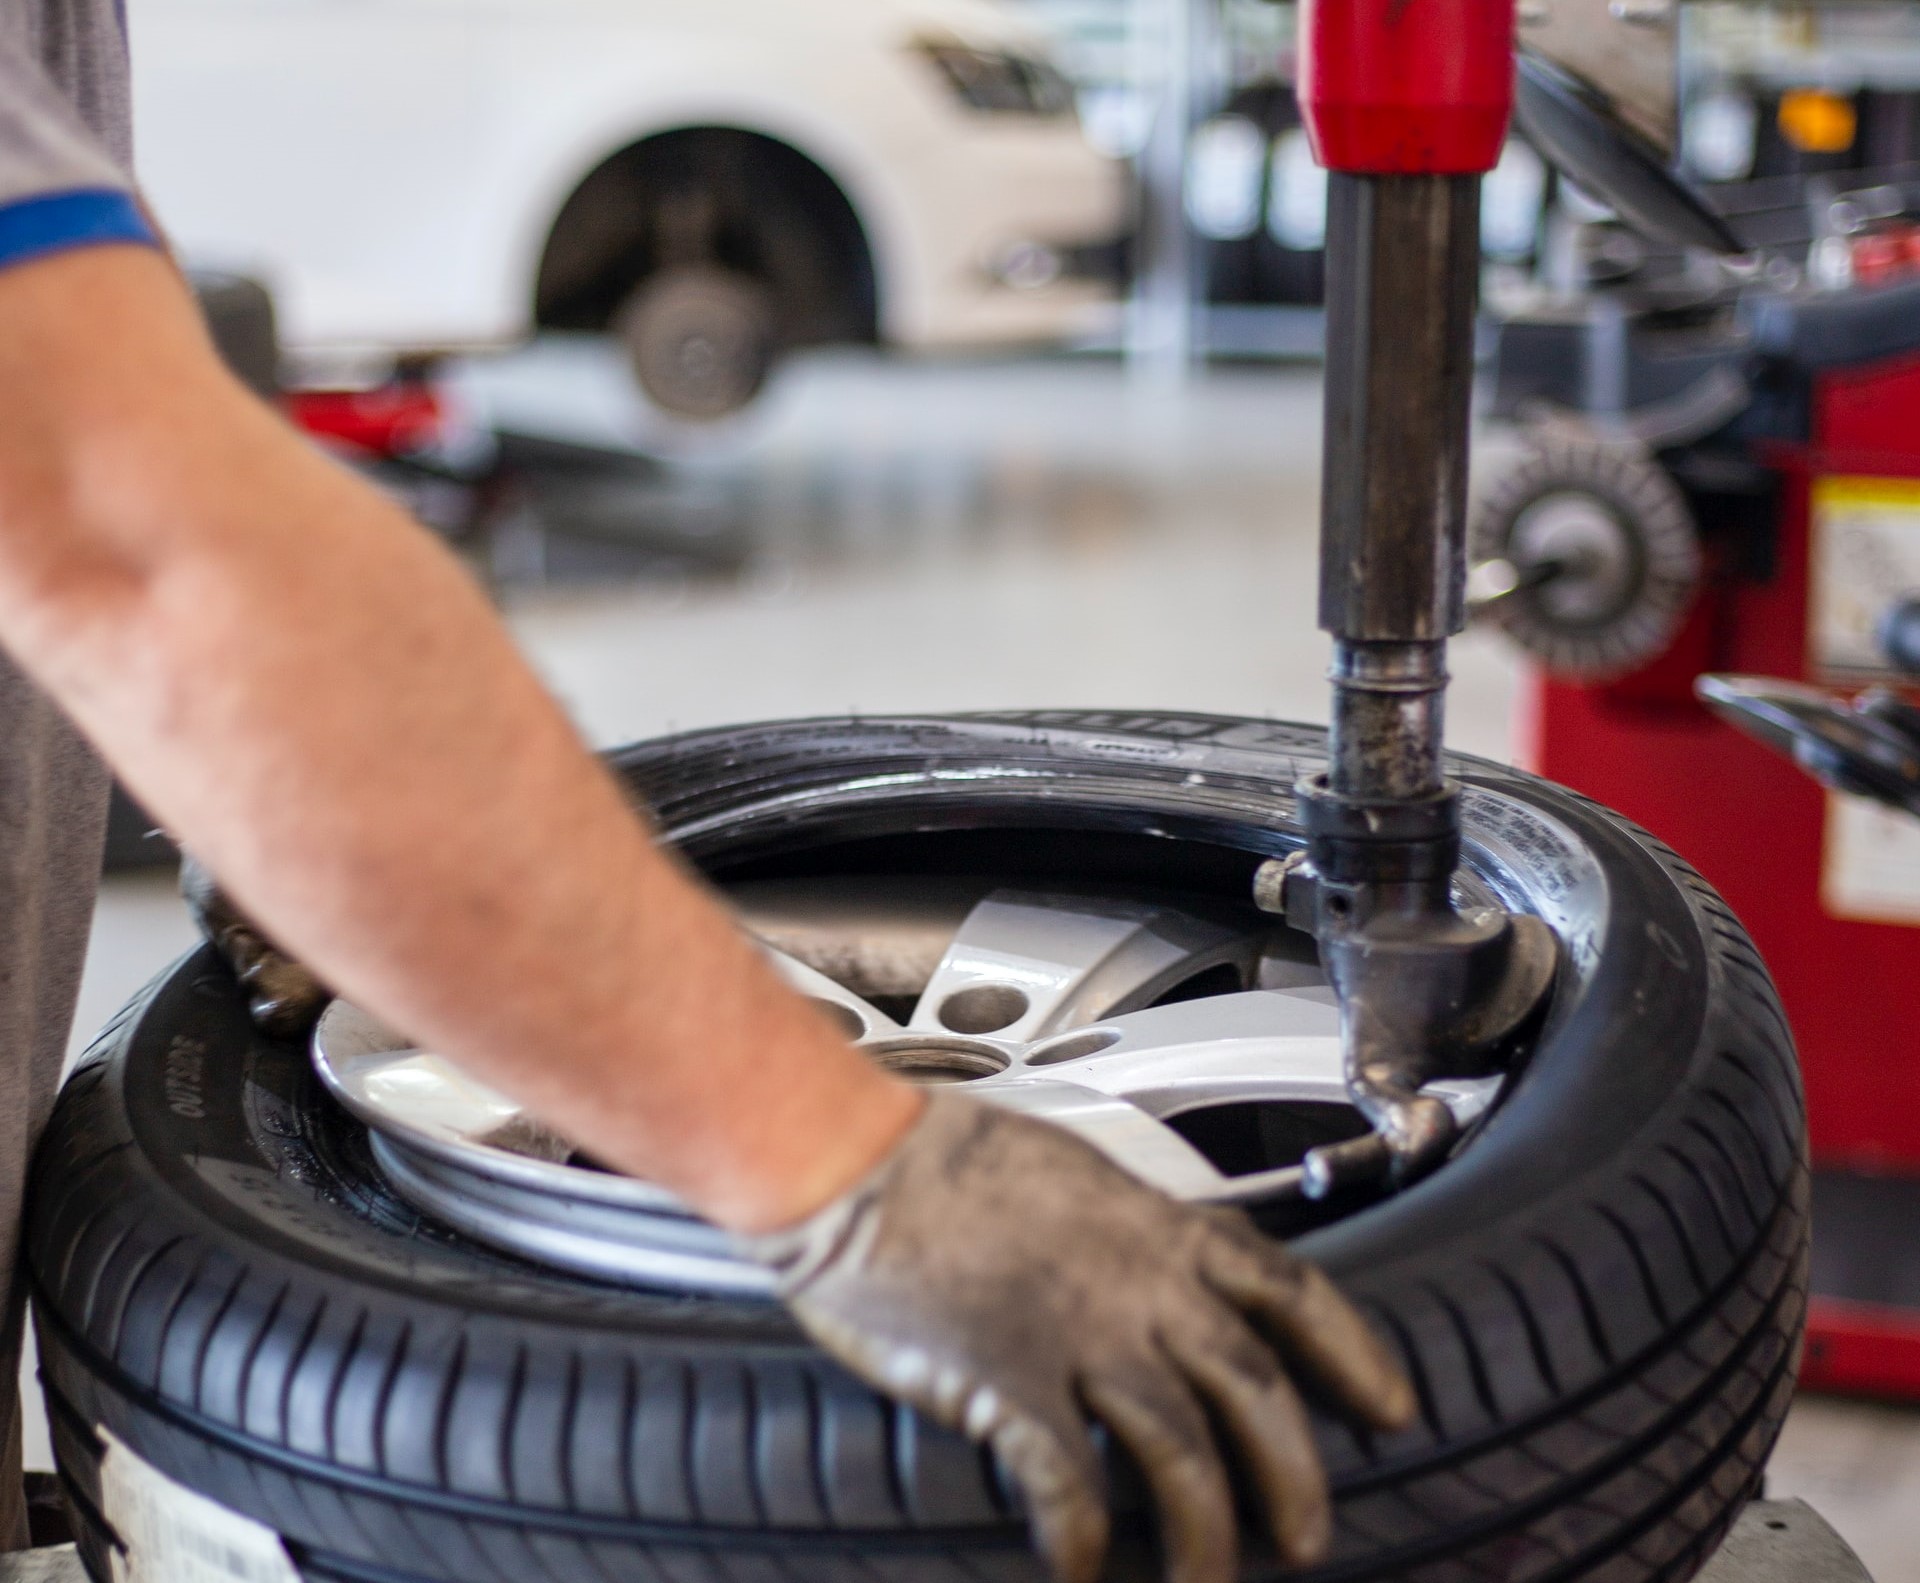 Replace Your Vehicle's Tires | Goodwill Car Donations